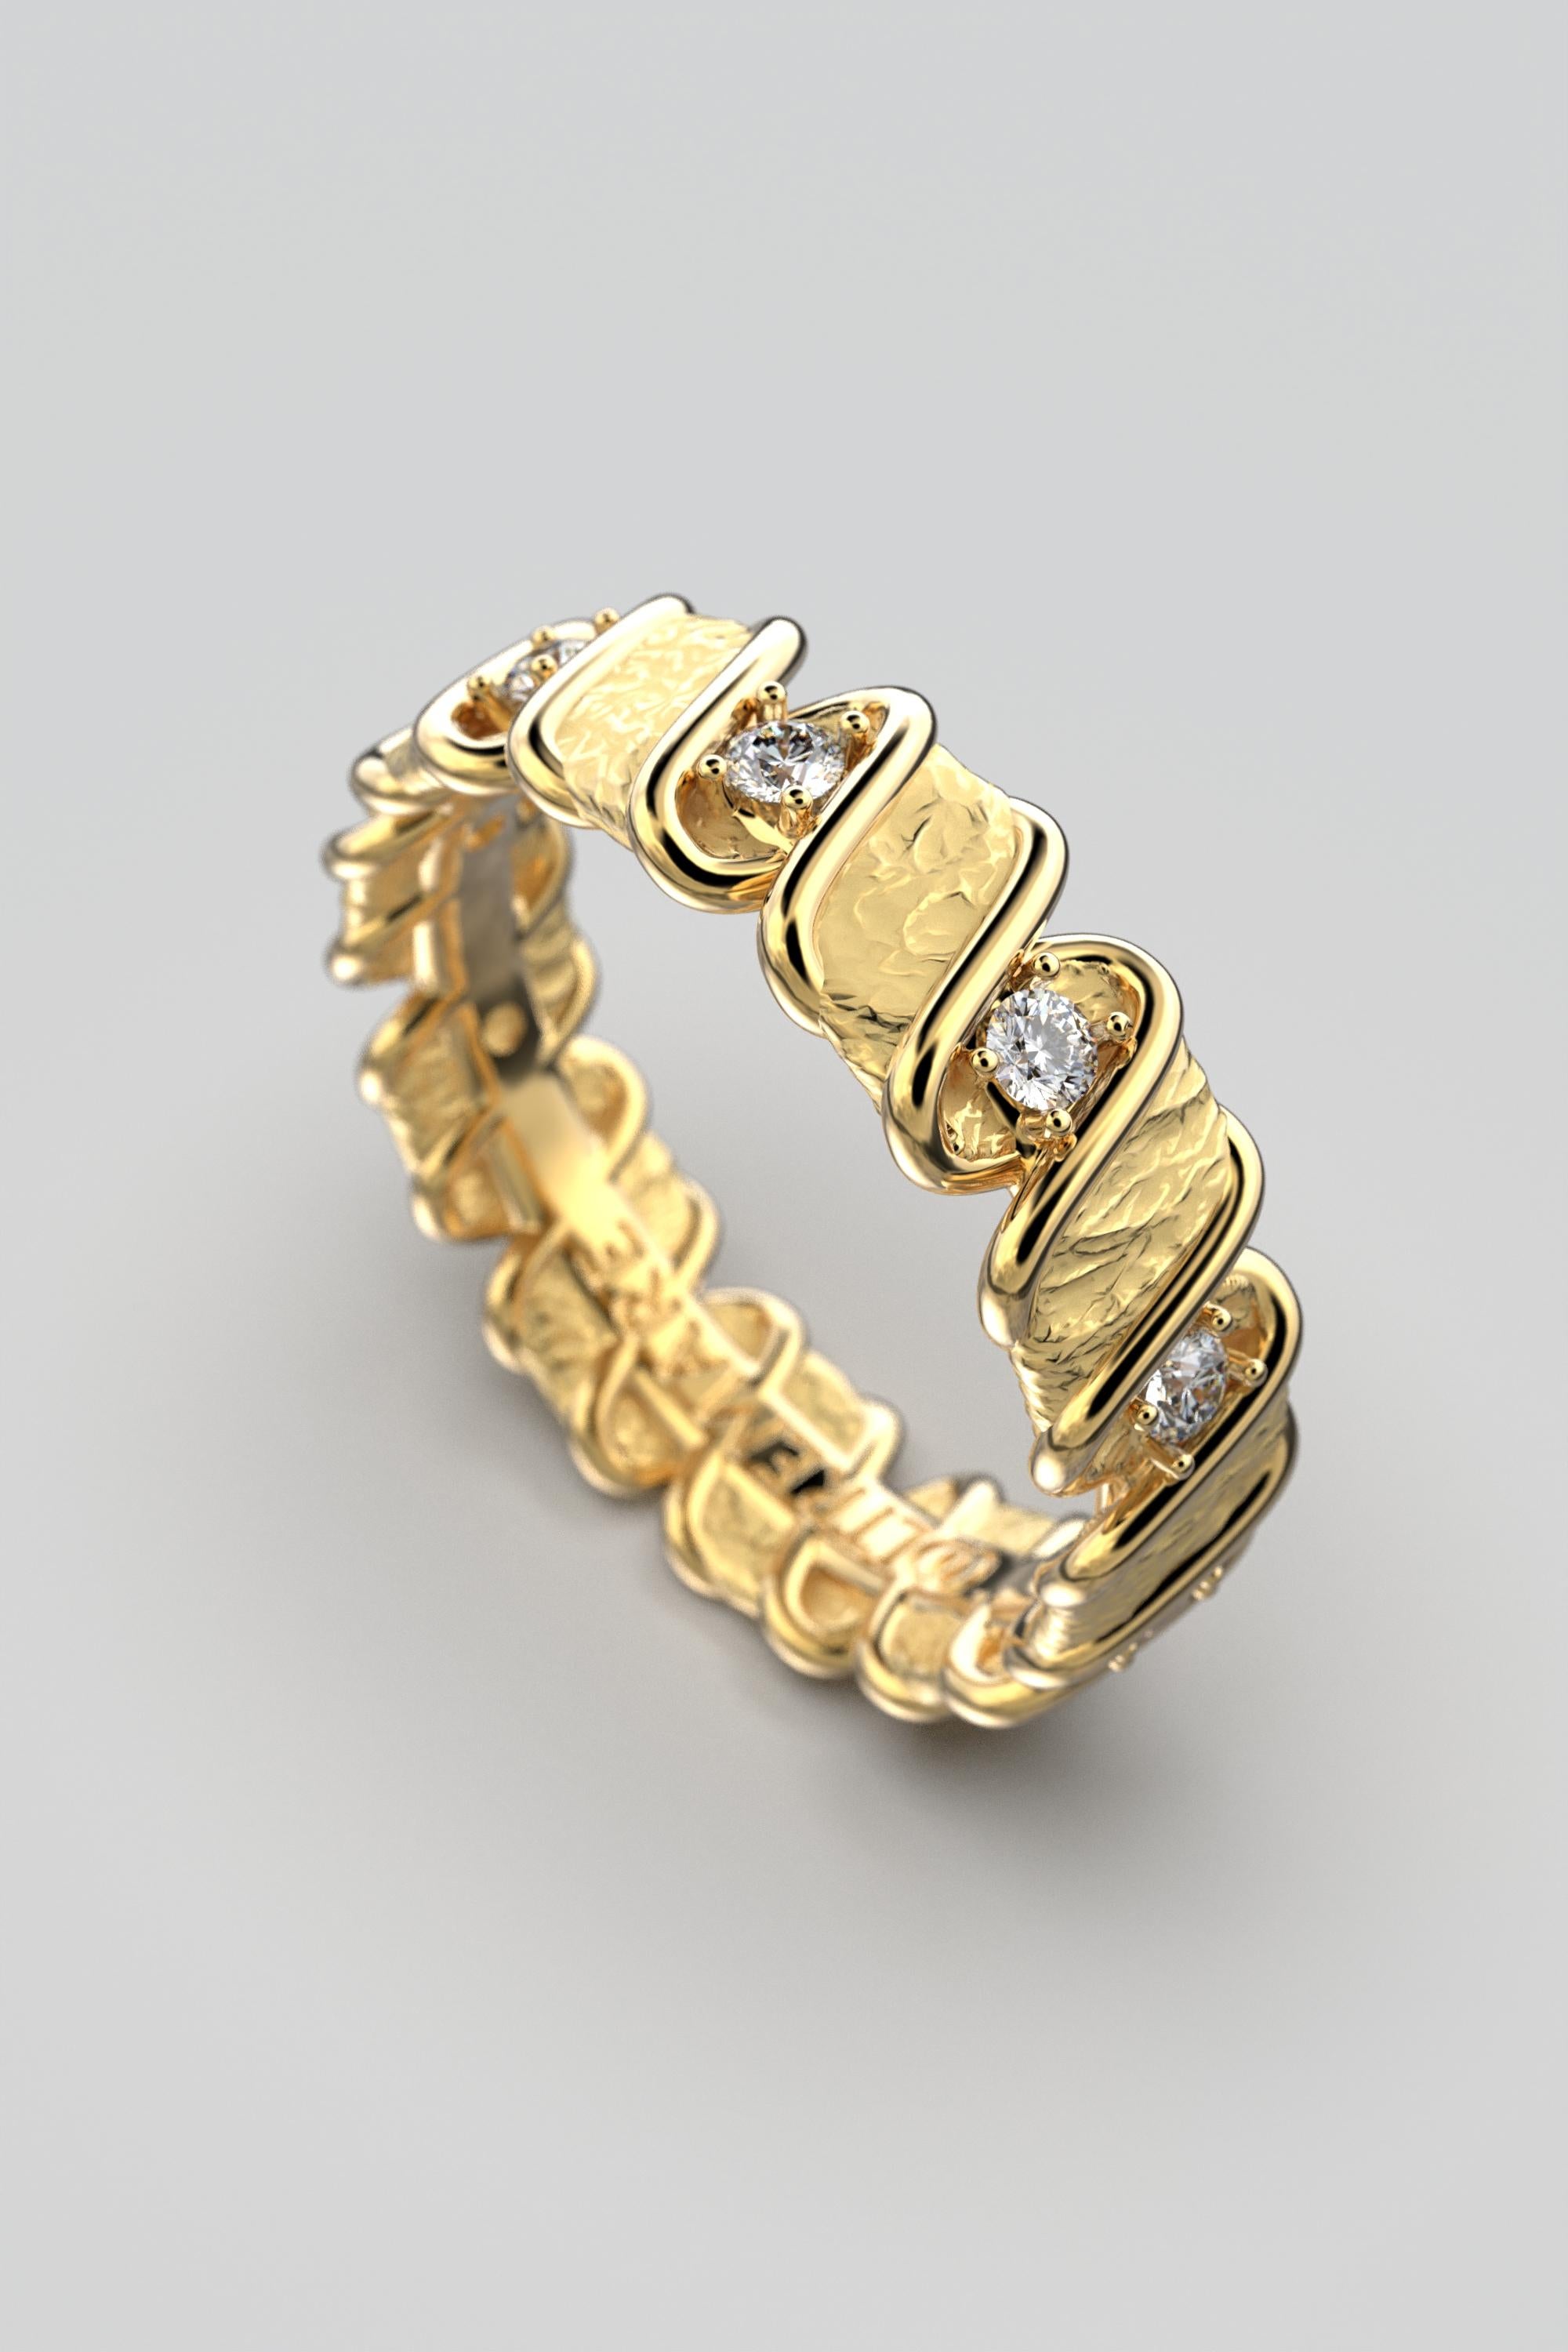 For Sale:  Italian Diamond Eternity Gold Band Made in Italy in 18k By Oltremare Gioielli 8